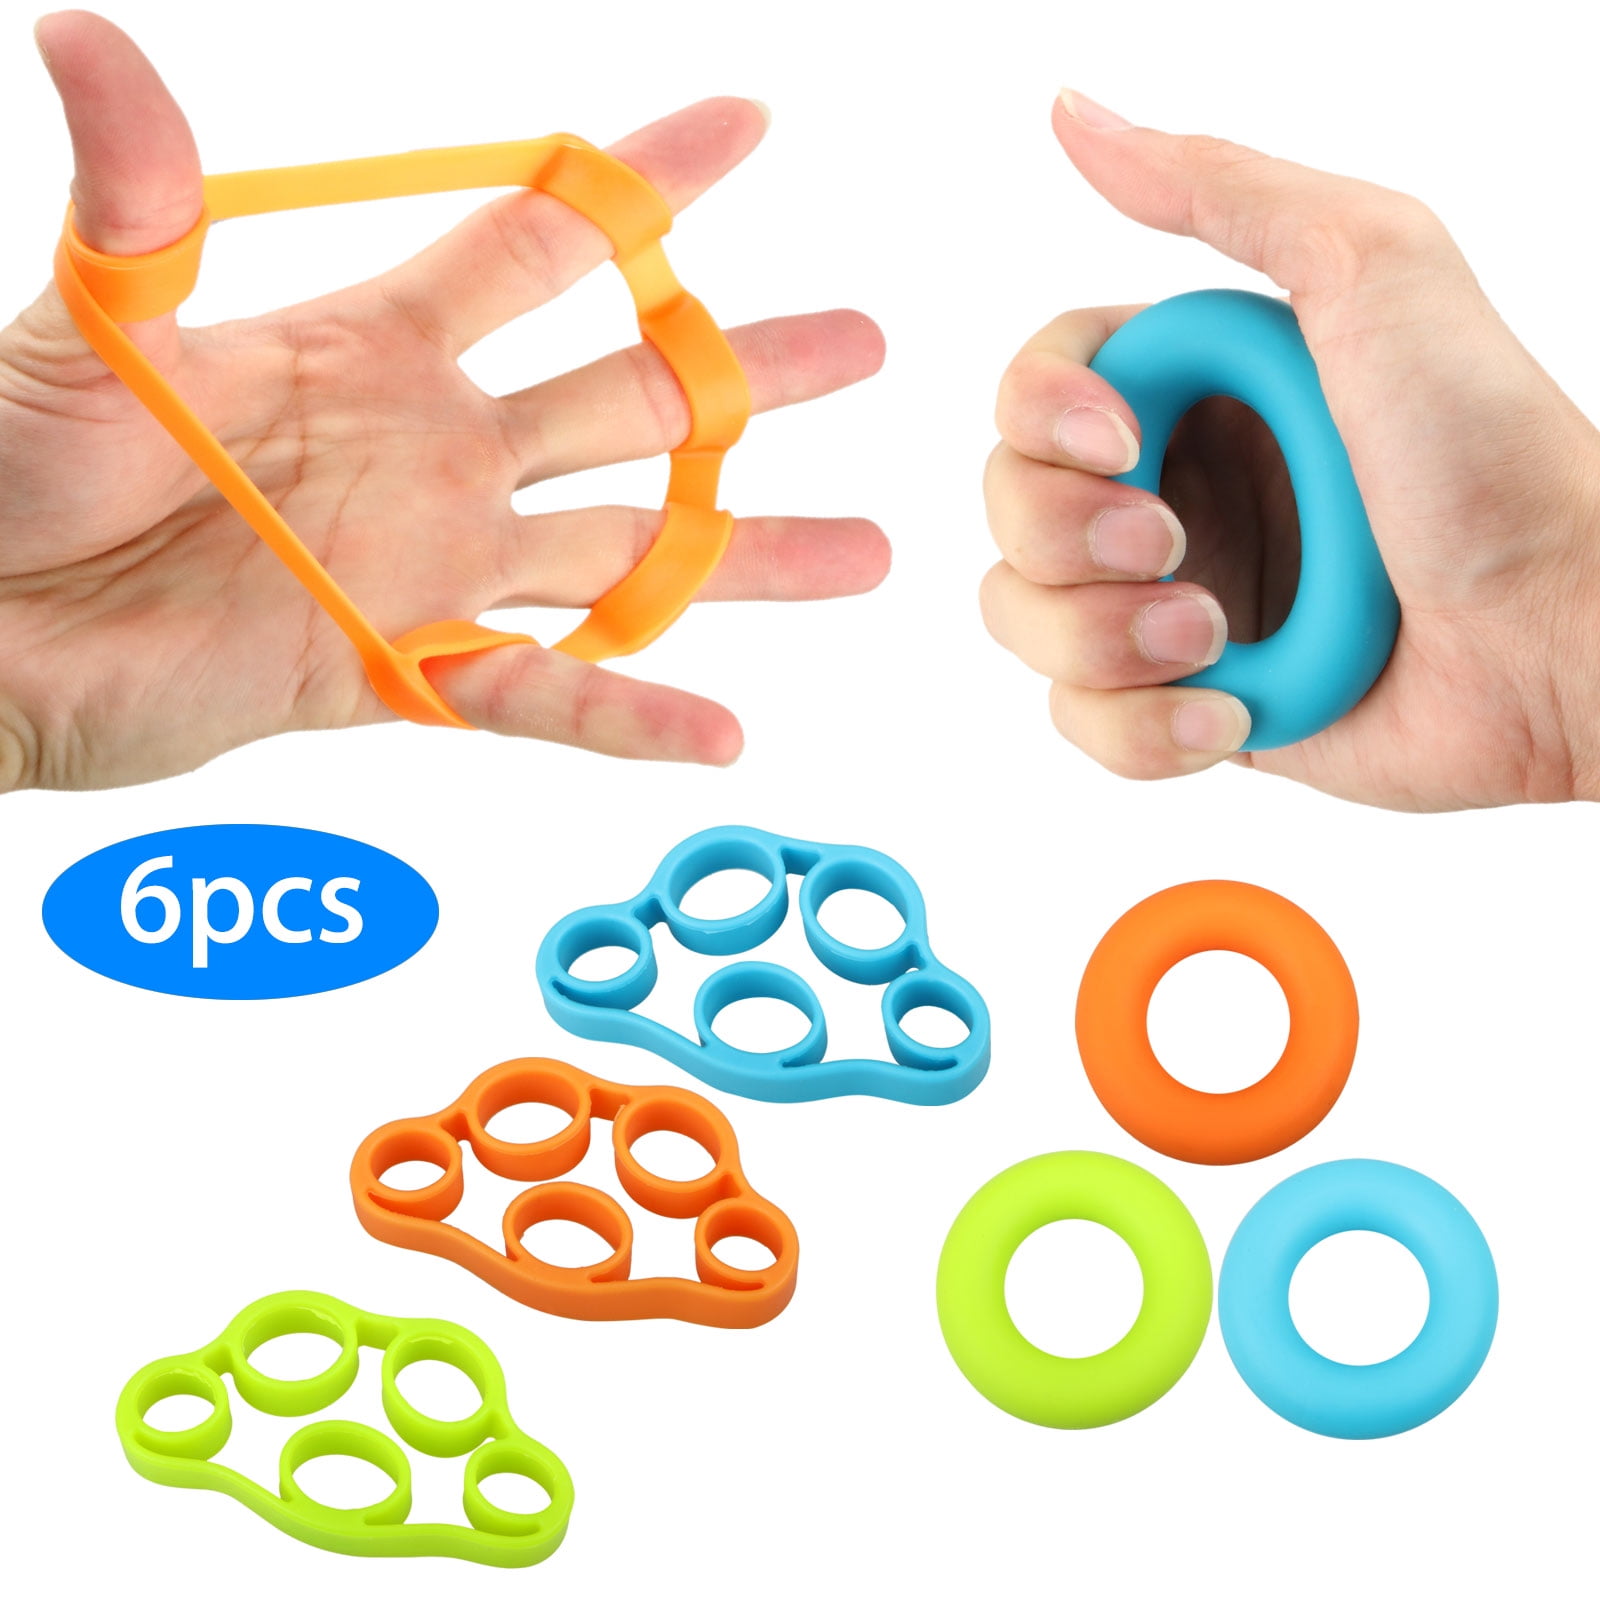 Finger exerciser Grip Strength Trainer Great for Rock Climbing and More 6 PCS Relieve Wrist & Thumb Pain Hand Grip Strengthener Carpal tunnel Finger Stretcher *NEW MATERIAL*Forearm grip workout 